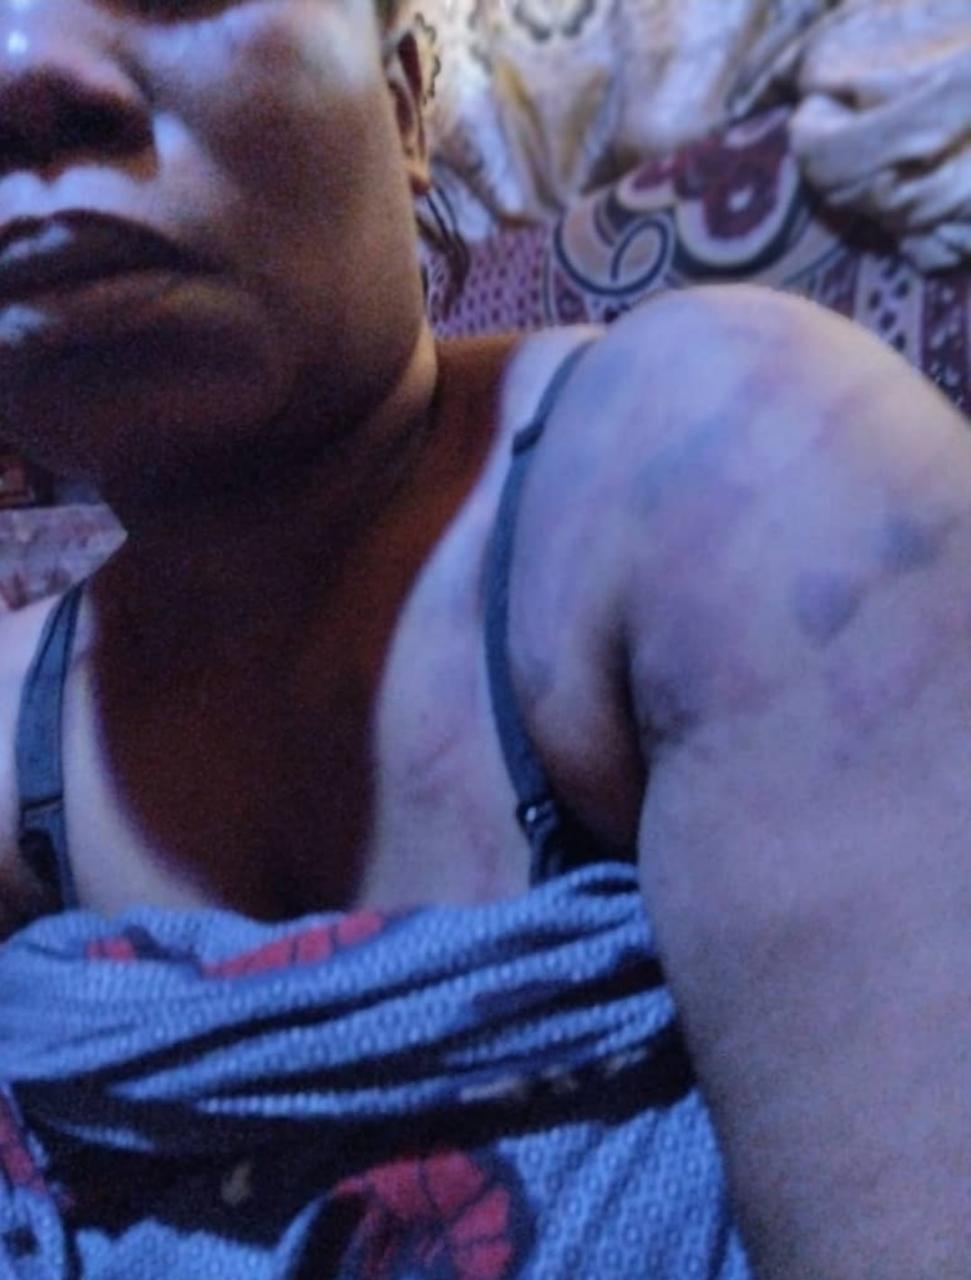 Nigerian Woman Bails Abusive Unemployed Husband That Beat Her To A Pulp (Photos)